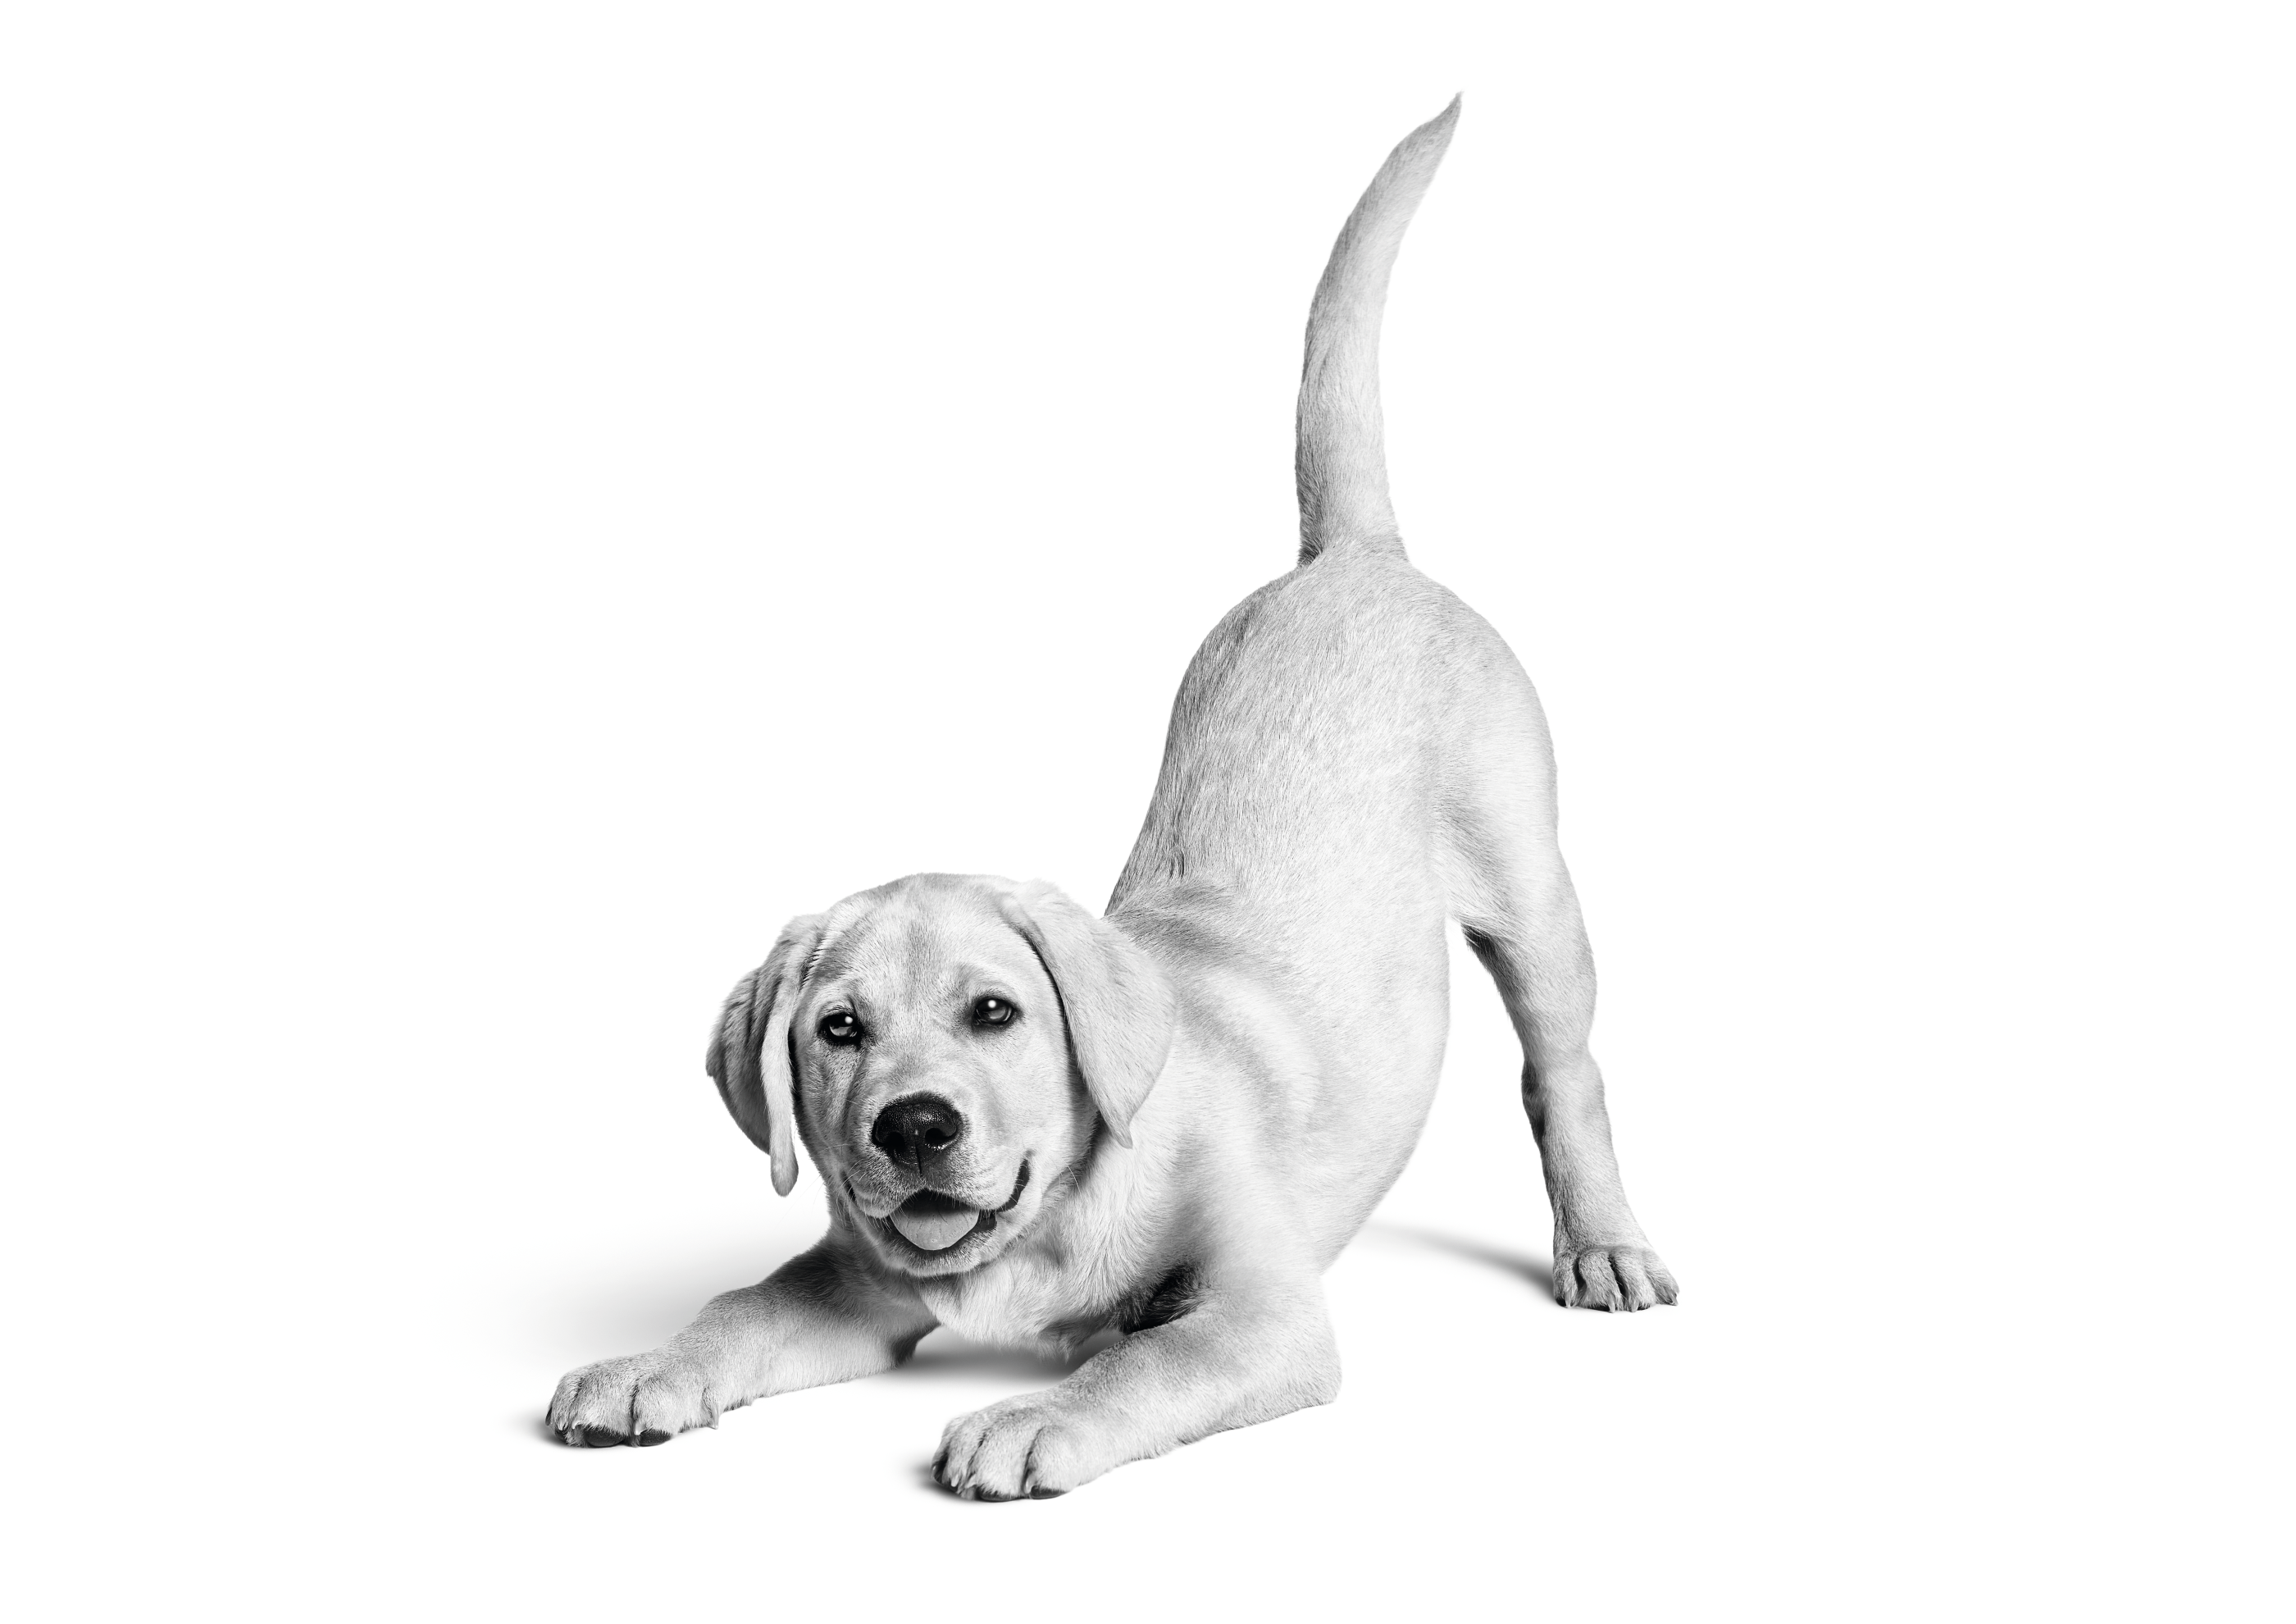 Labrador Retriever puppy crouching playing in black and white on a white background